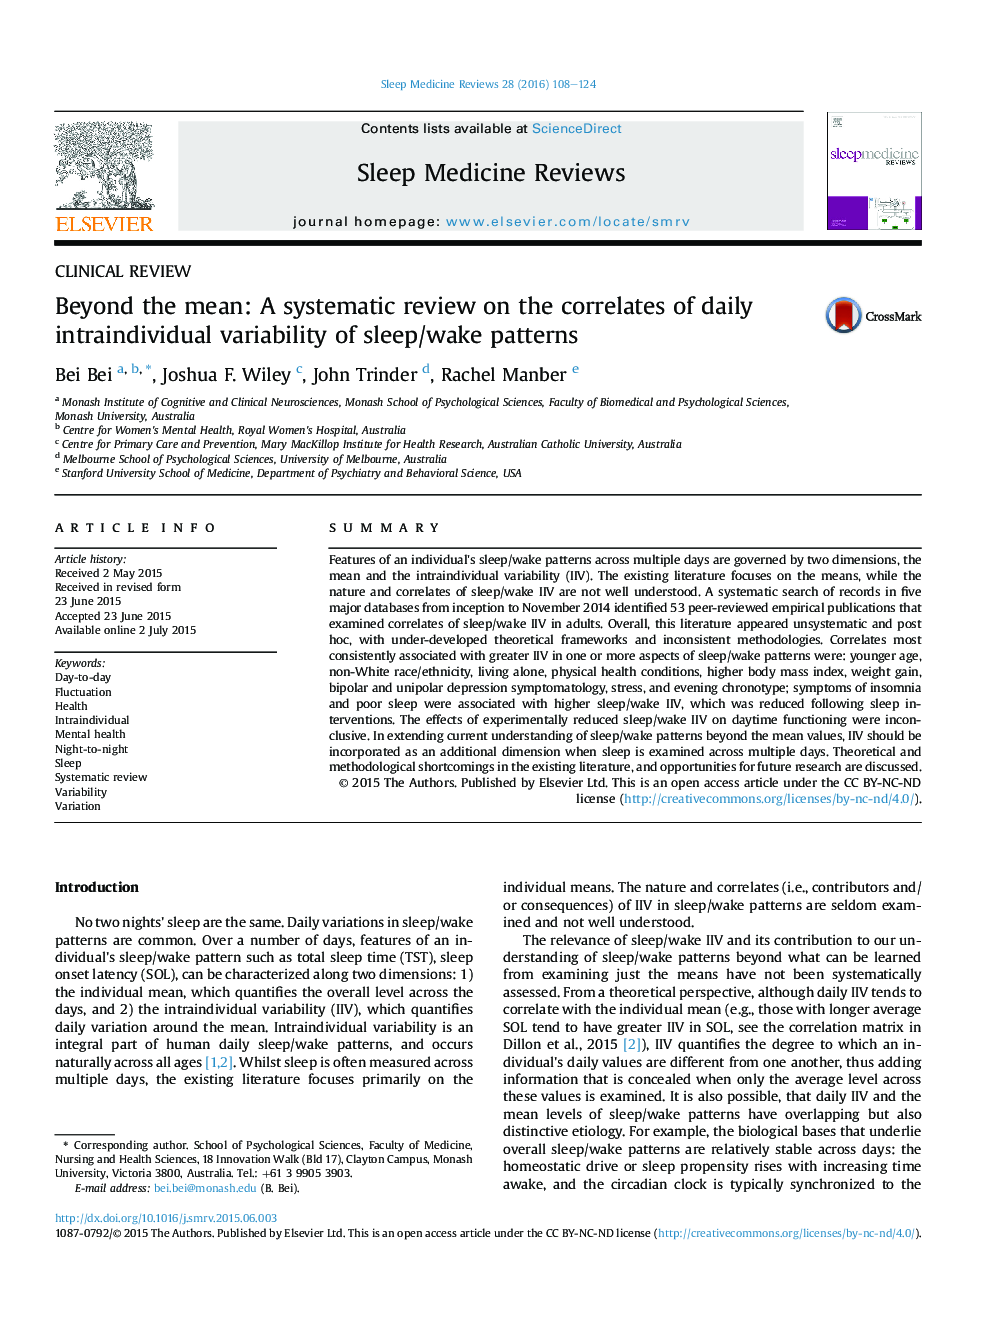 Clinical reviewBeyond the mean: A systematic review on the correlates of daily intraindividual variability of sleep/wake patterns